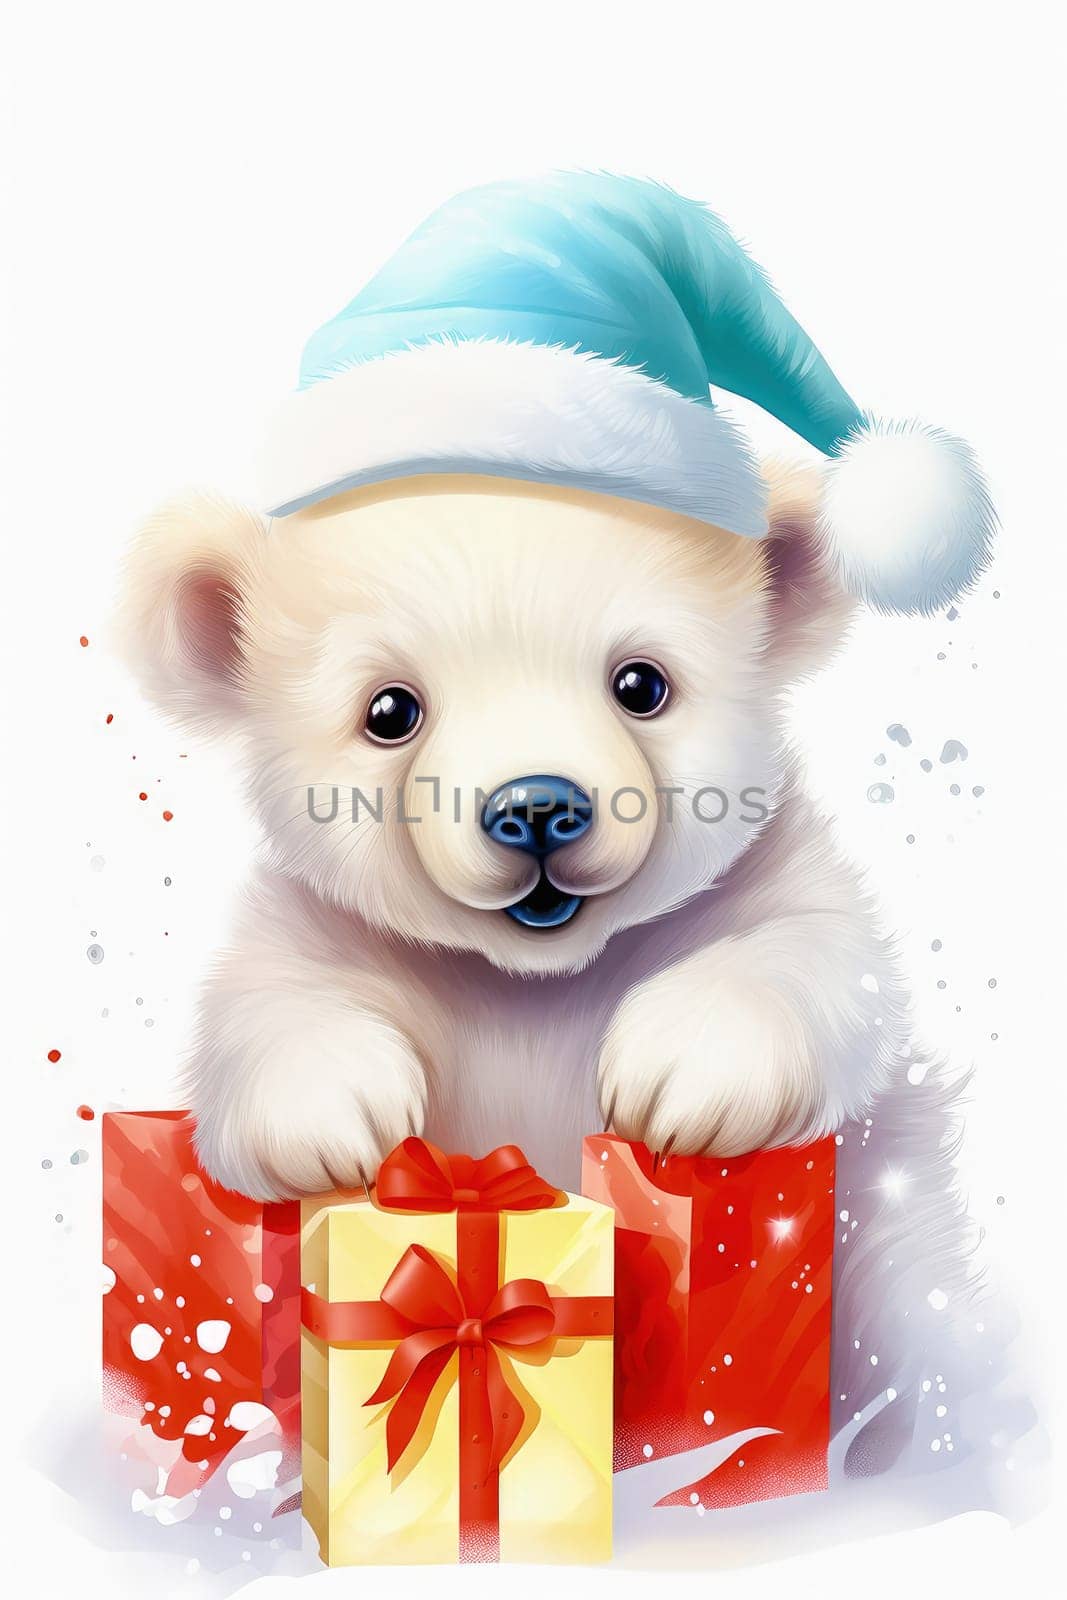 White little bear in New Year, hat with gifts. New Year's holiday concept